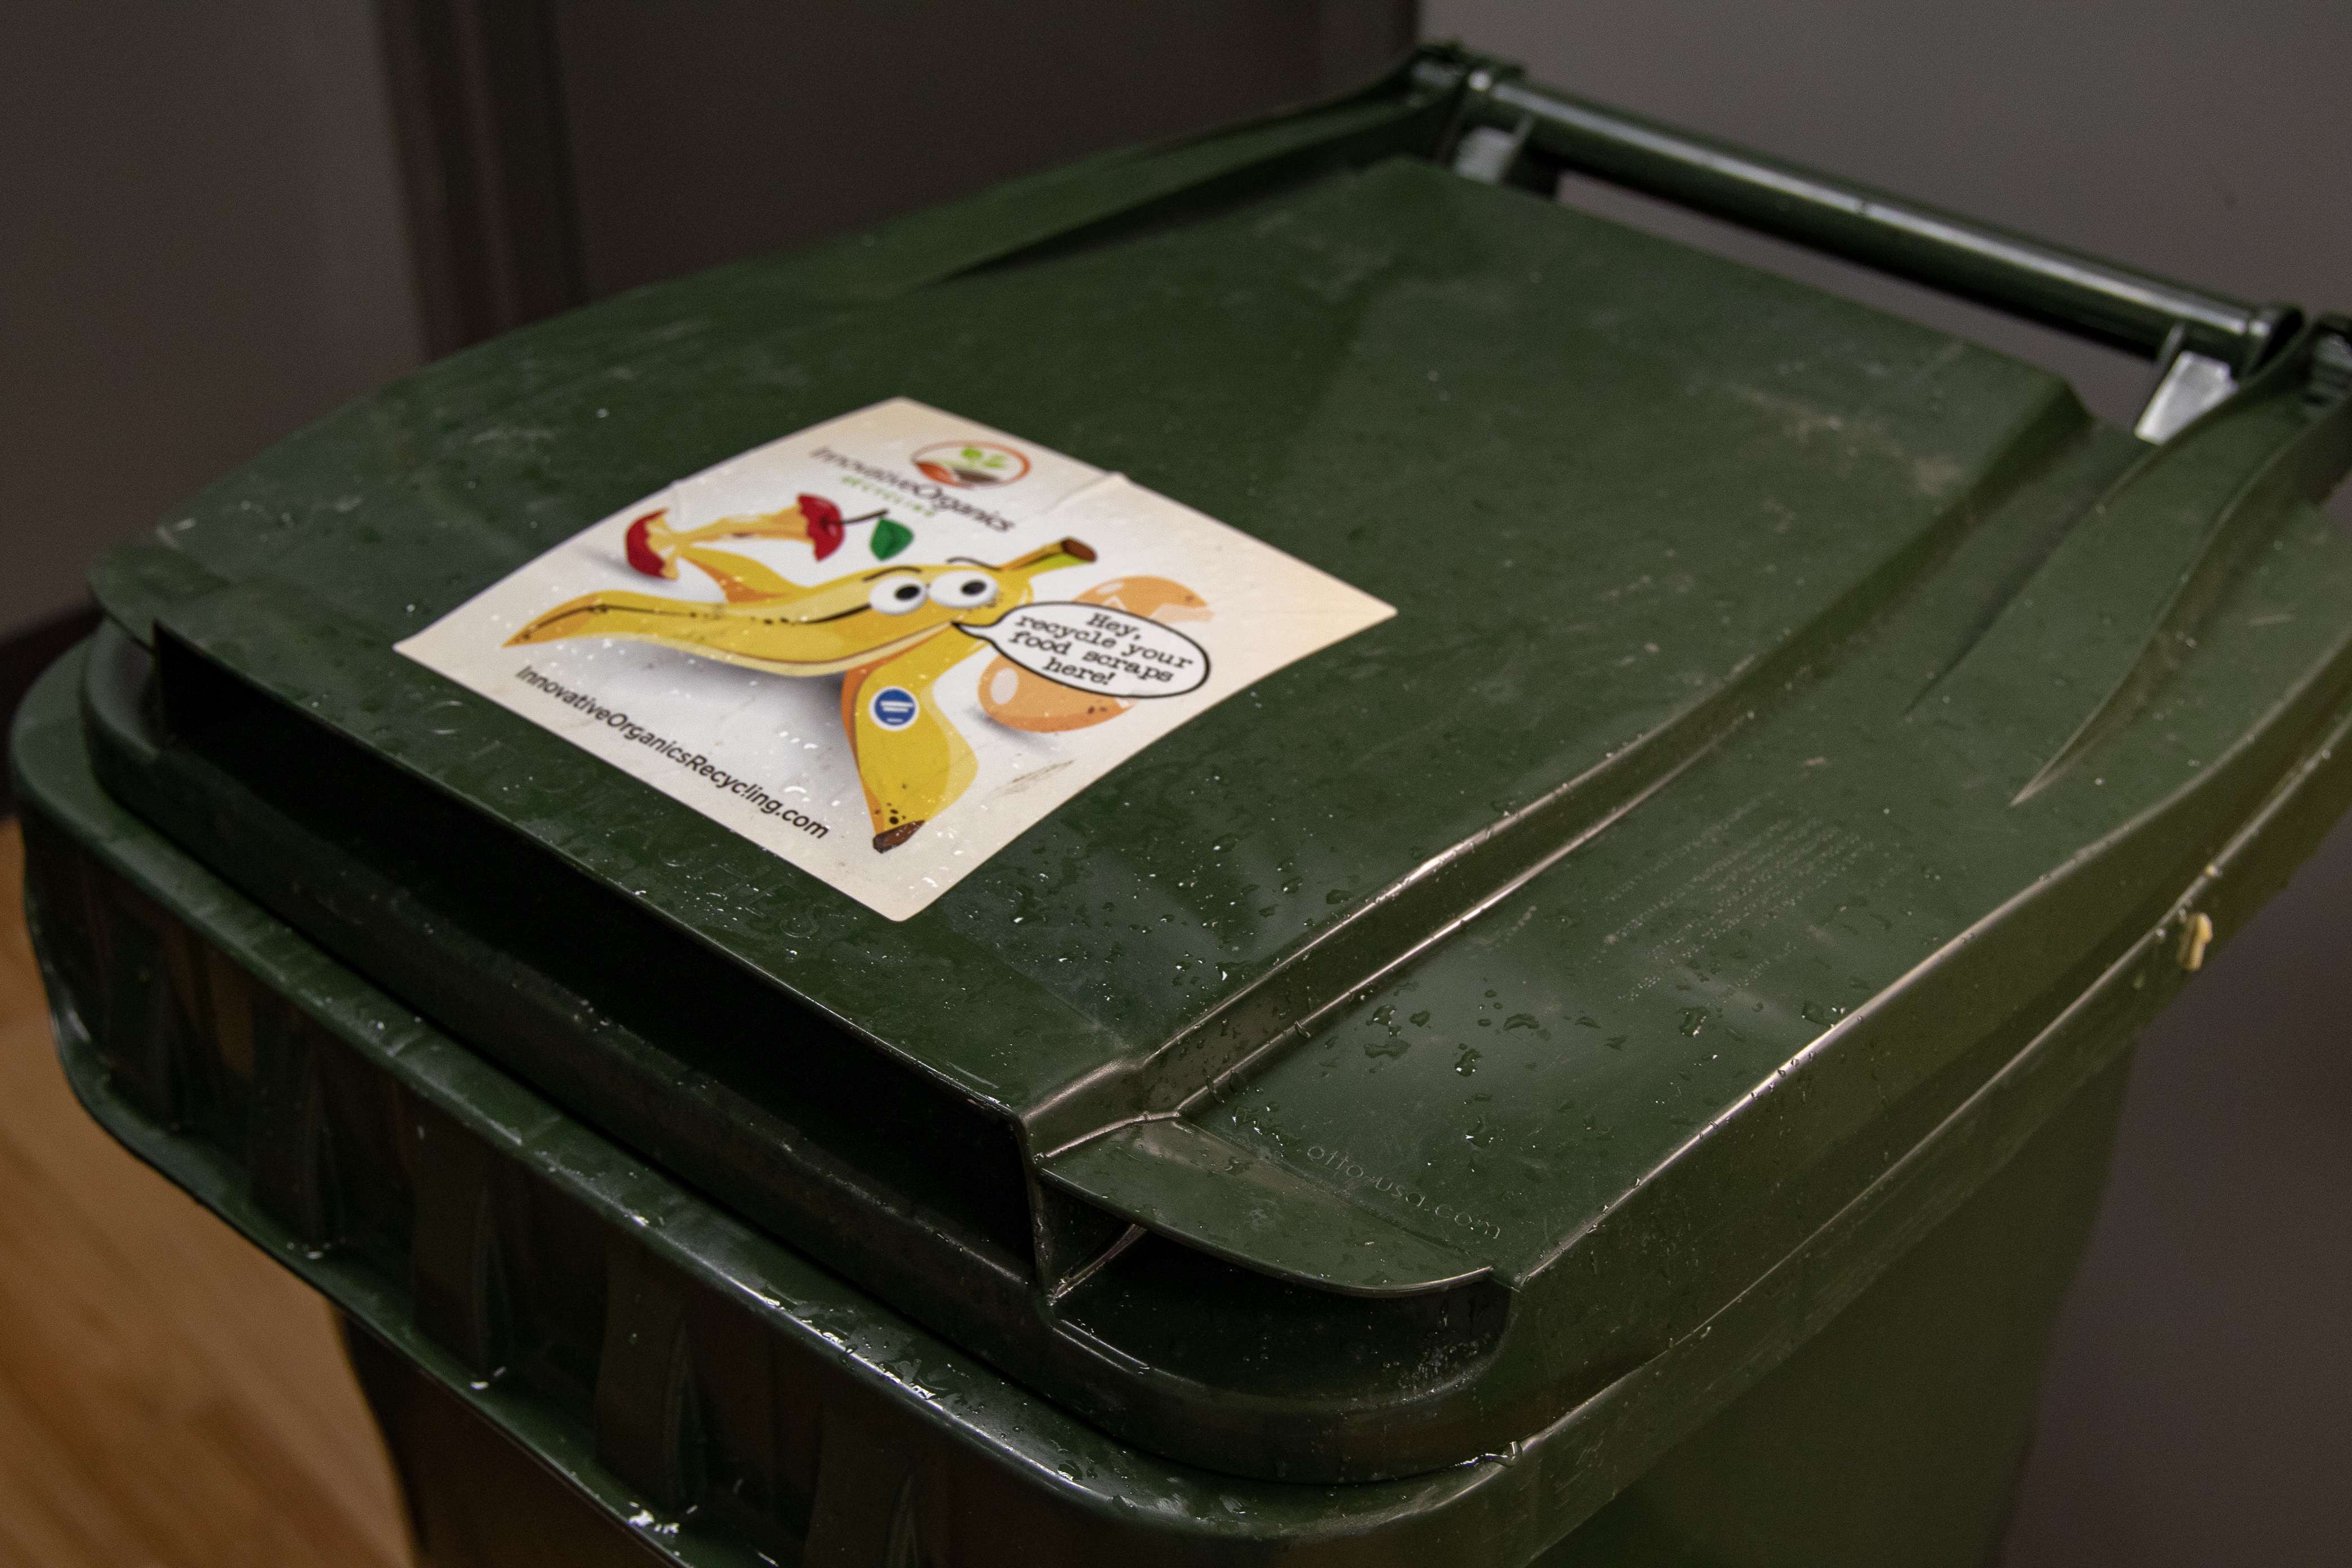 What you need to know about recycling on campus